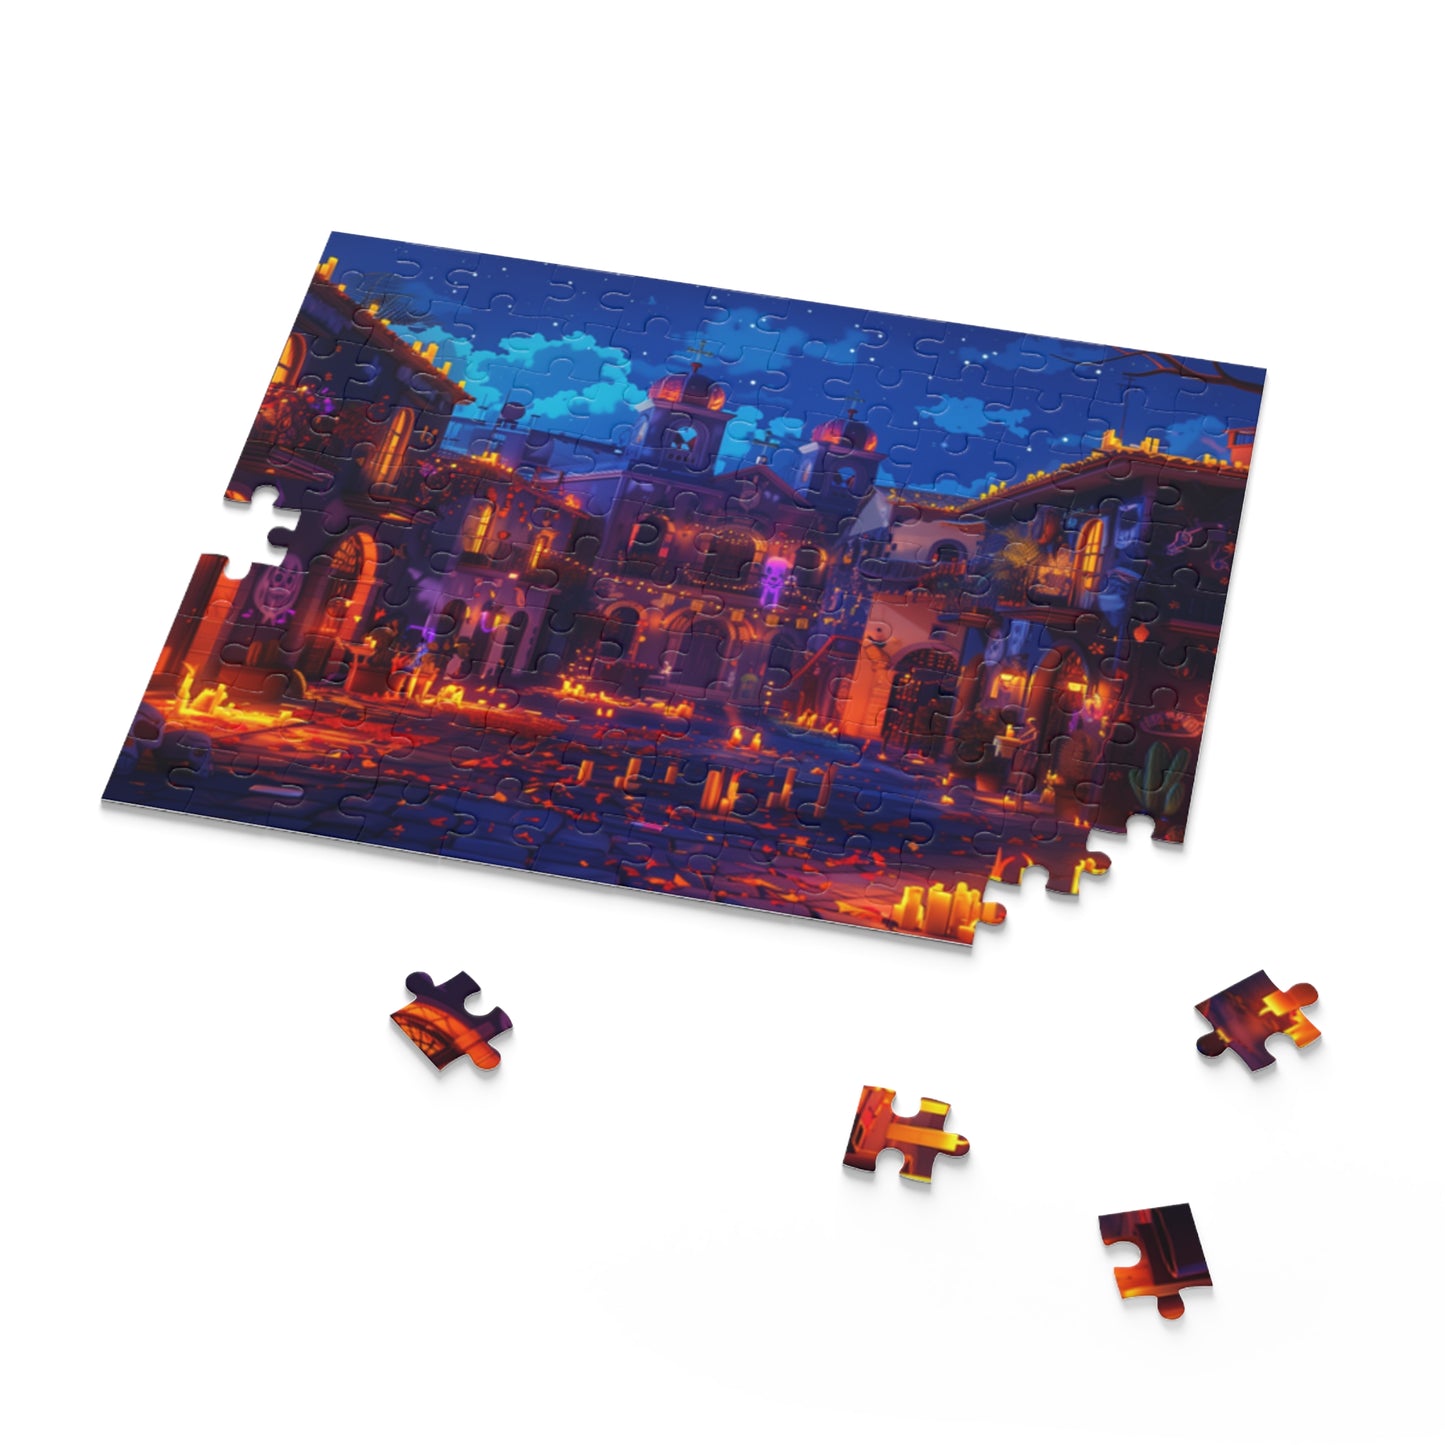 Mexican Art Candle Night Church Retro Jigsaw Puzzle Adult Birthday Business Jigsaw Puzzle Gift for Him Funny Humorous Indoor Outdoor Game Gift For Her Online-7